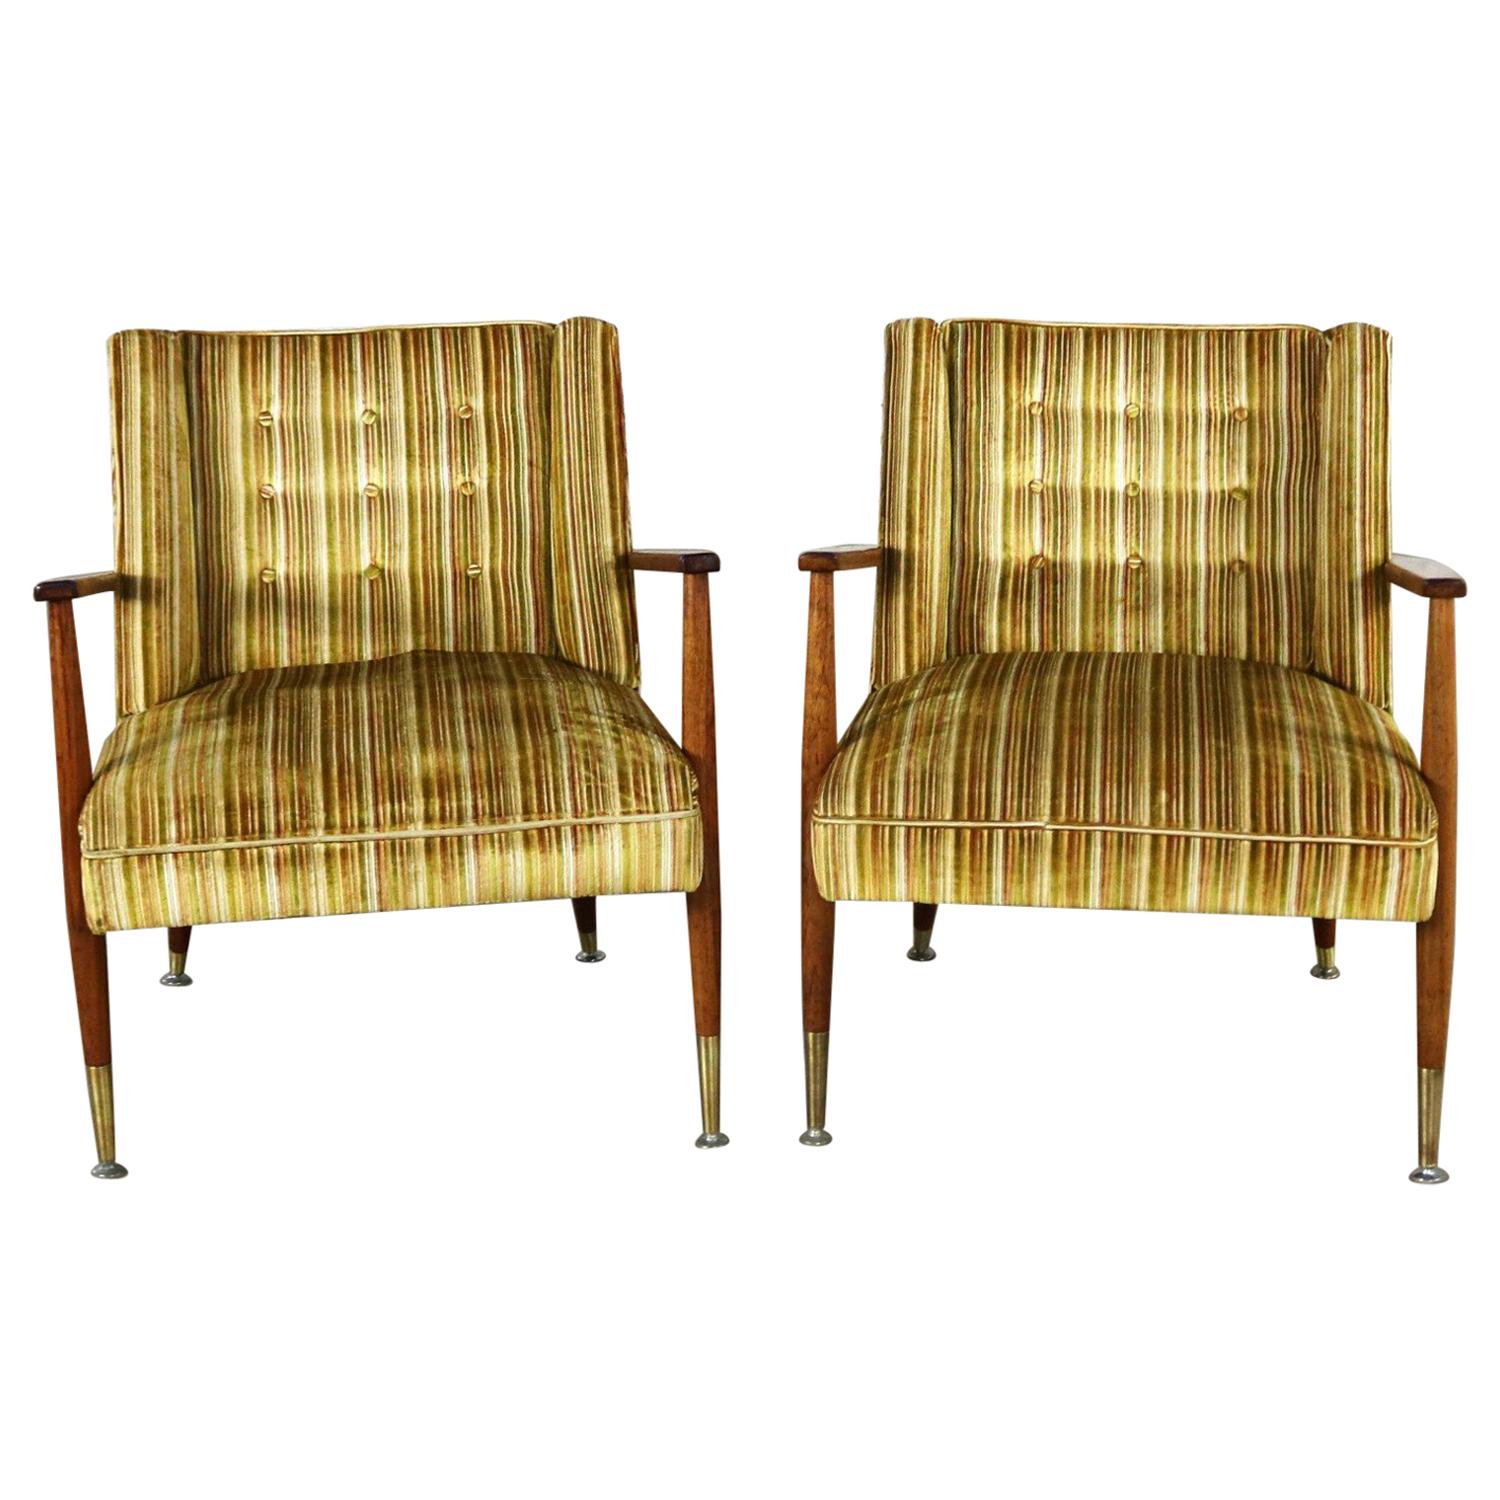 Mid-Century Modern Pair of Lounge Chairs with Teak Arms and Legs & Brass Sabots